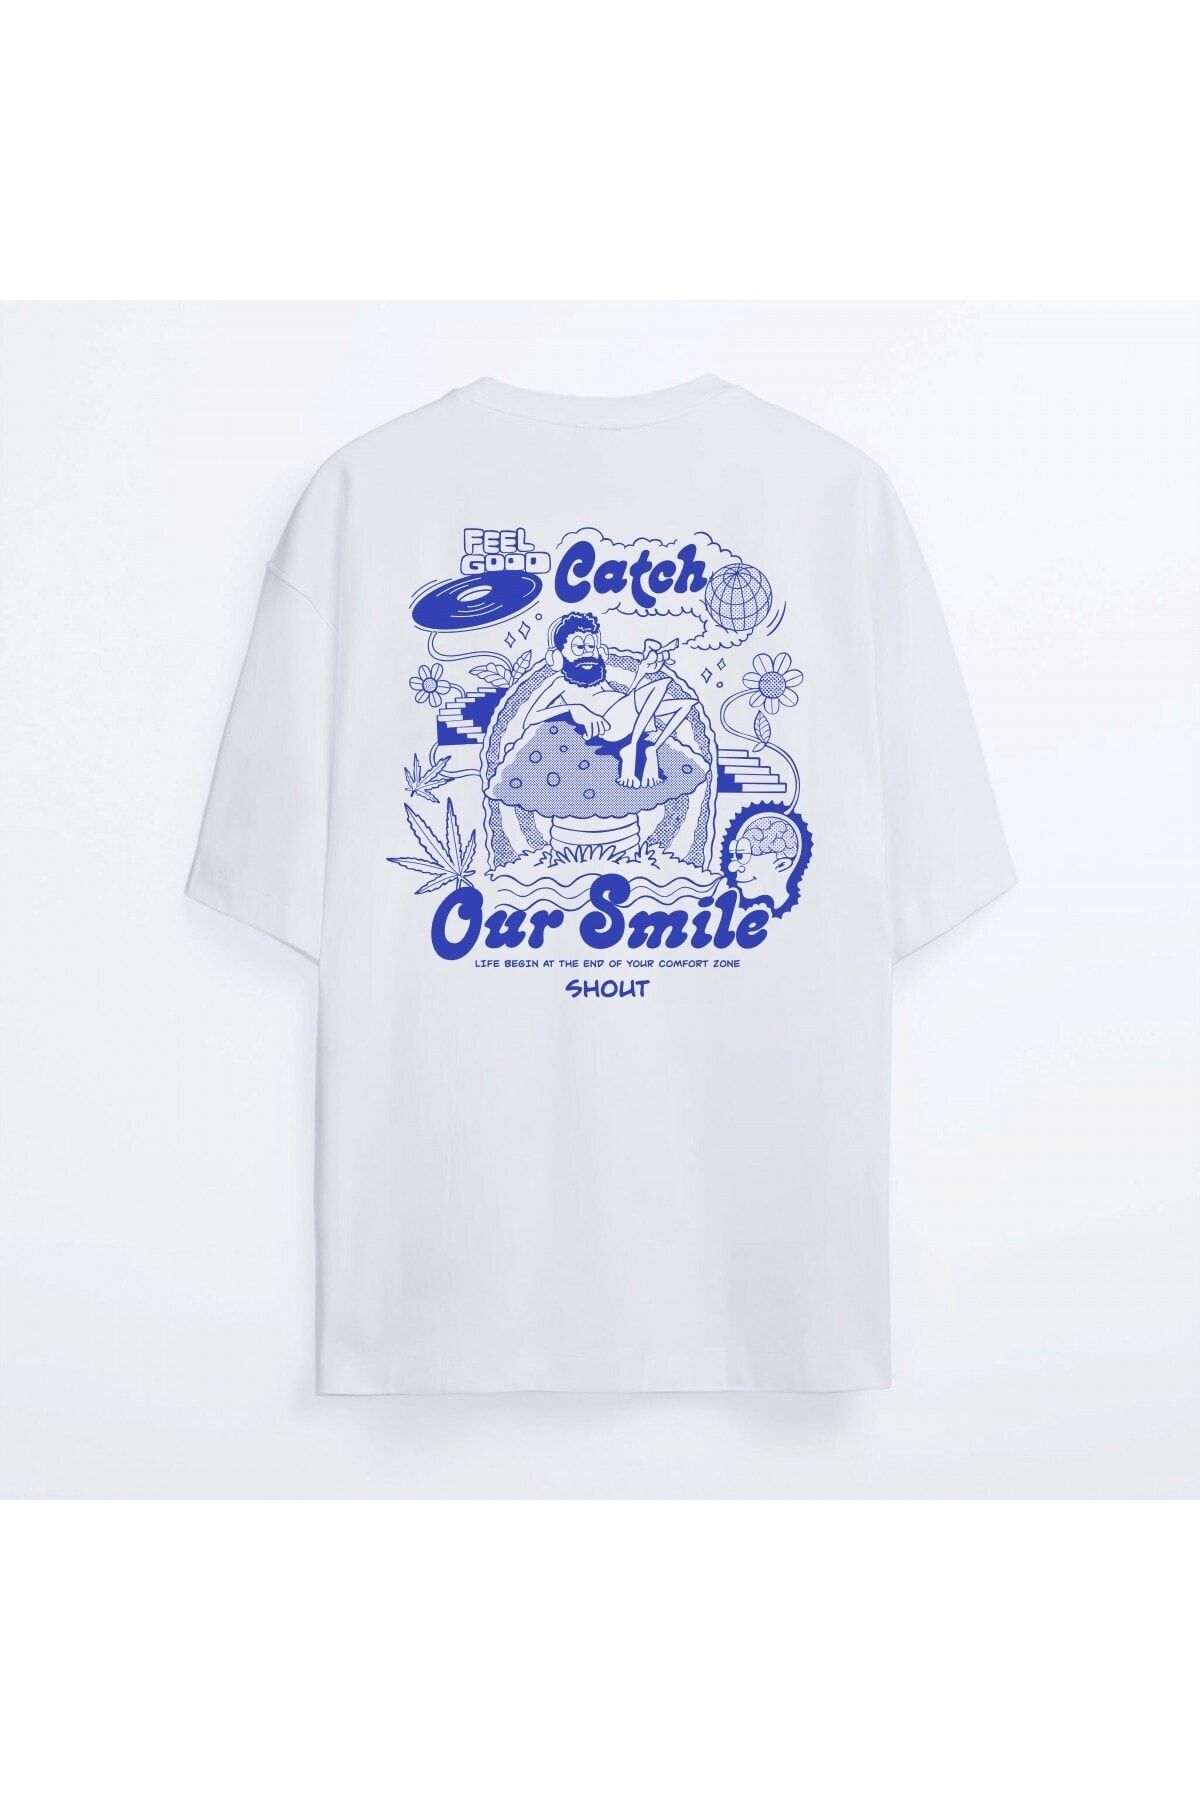 Shout Oversize Feel Good Catch Our Smile Oldschool Unisex T-shirt